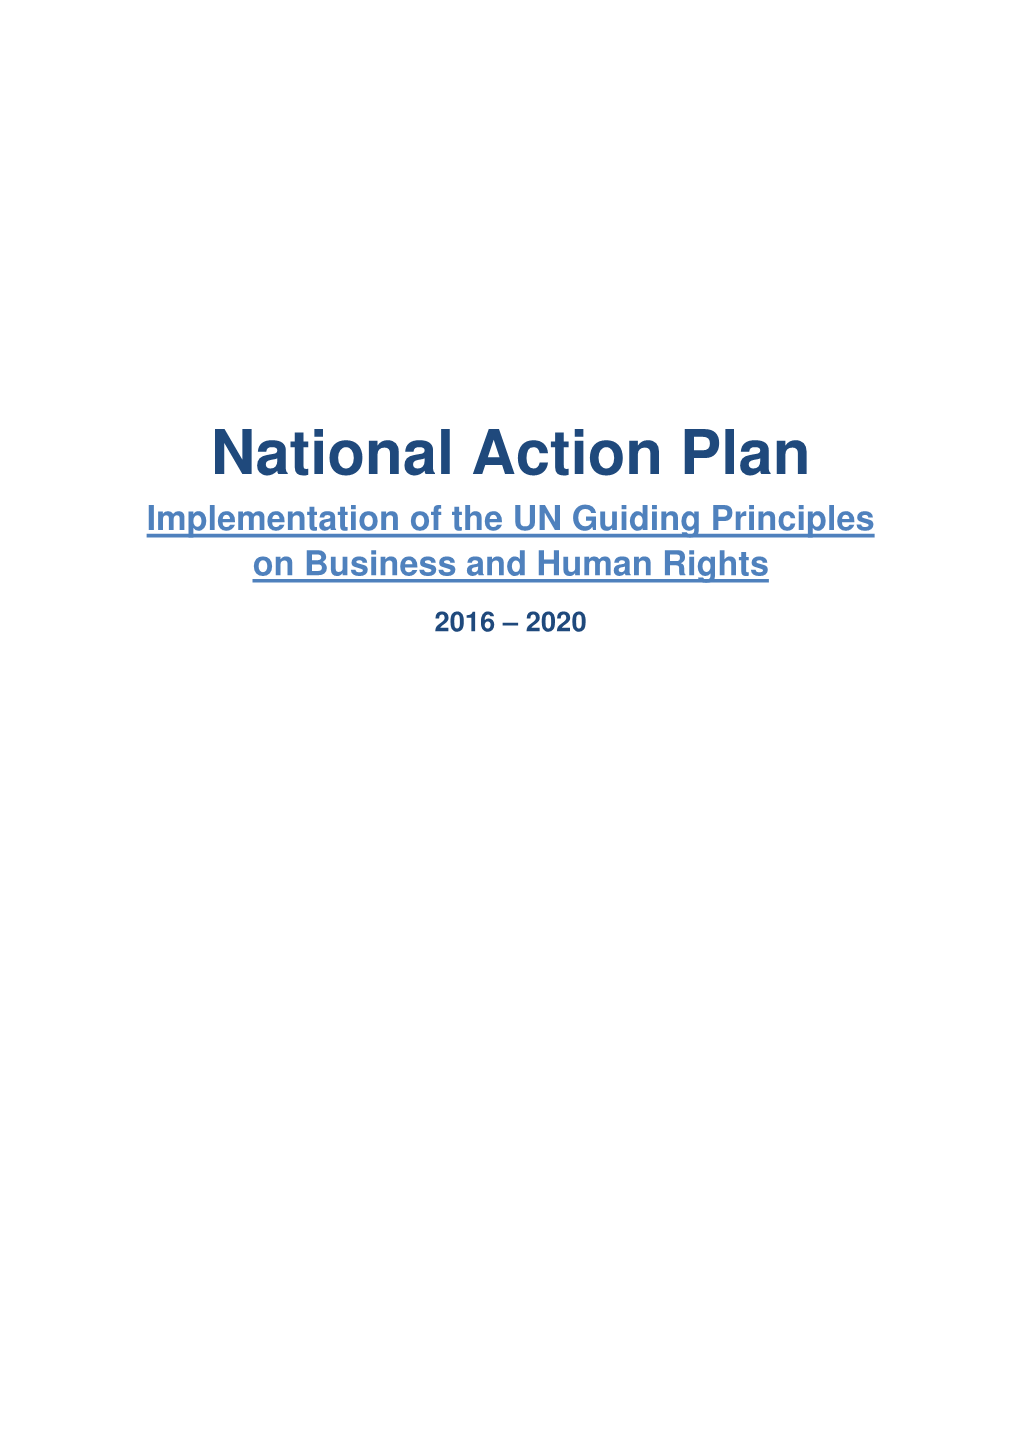 National Action Plan Implementation of the UN Guiding Principles on Business and Human Rights 2016 – 2020